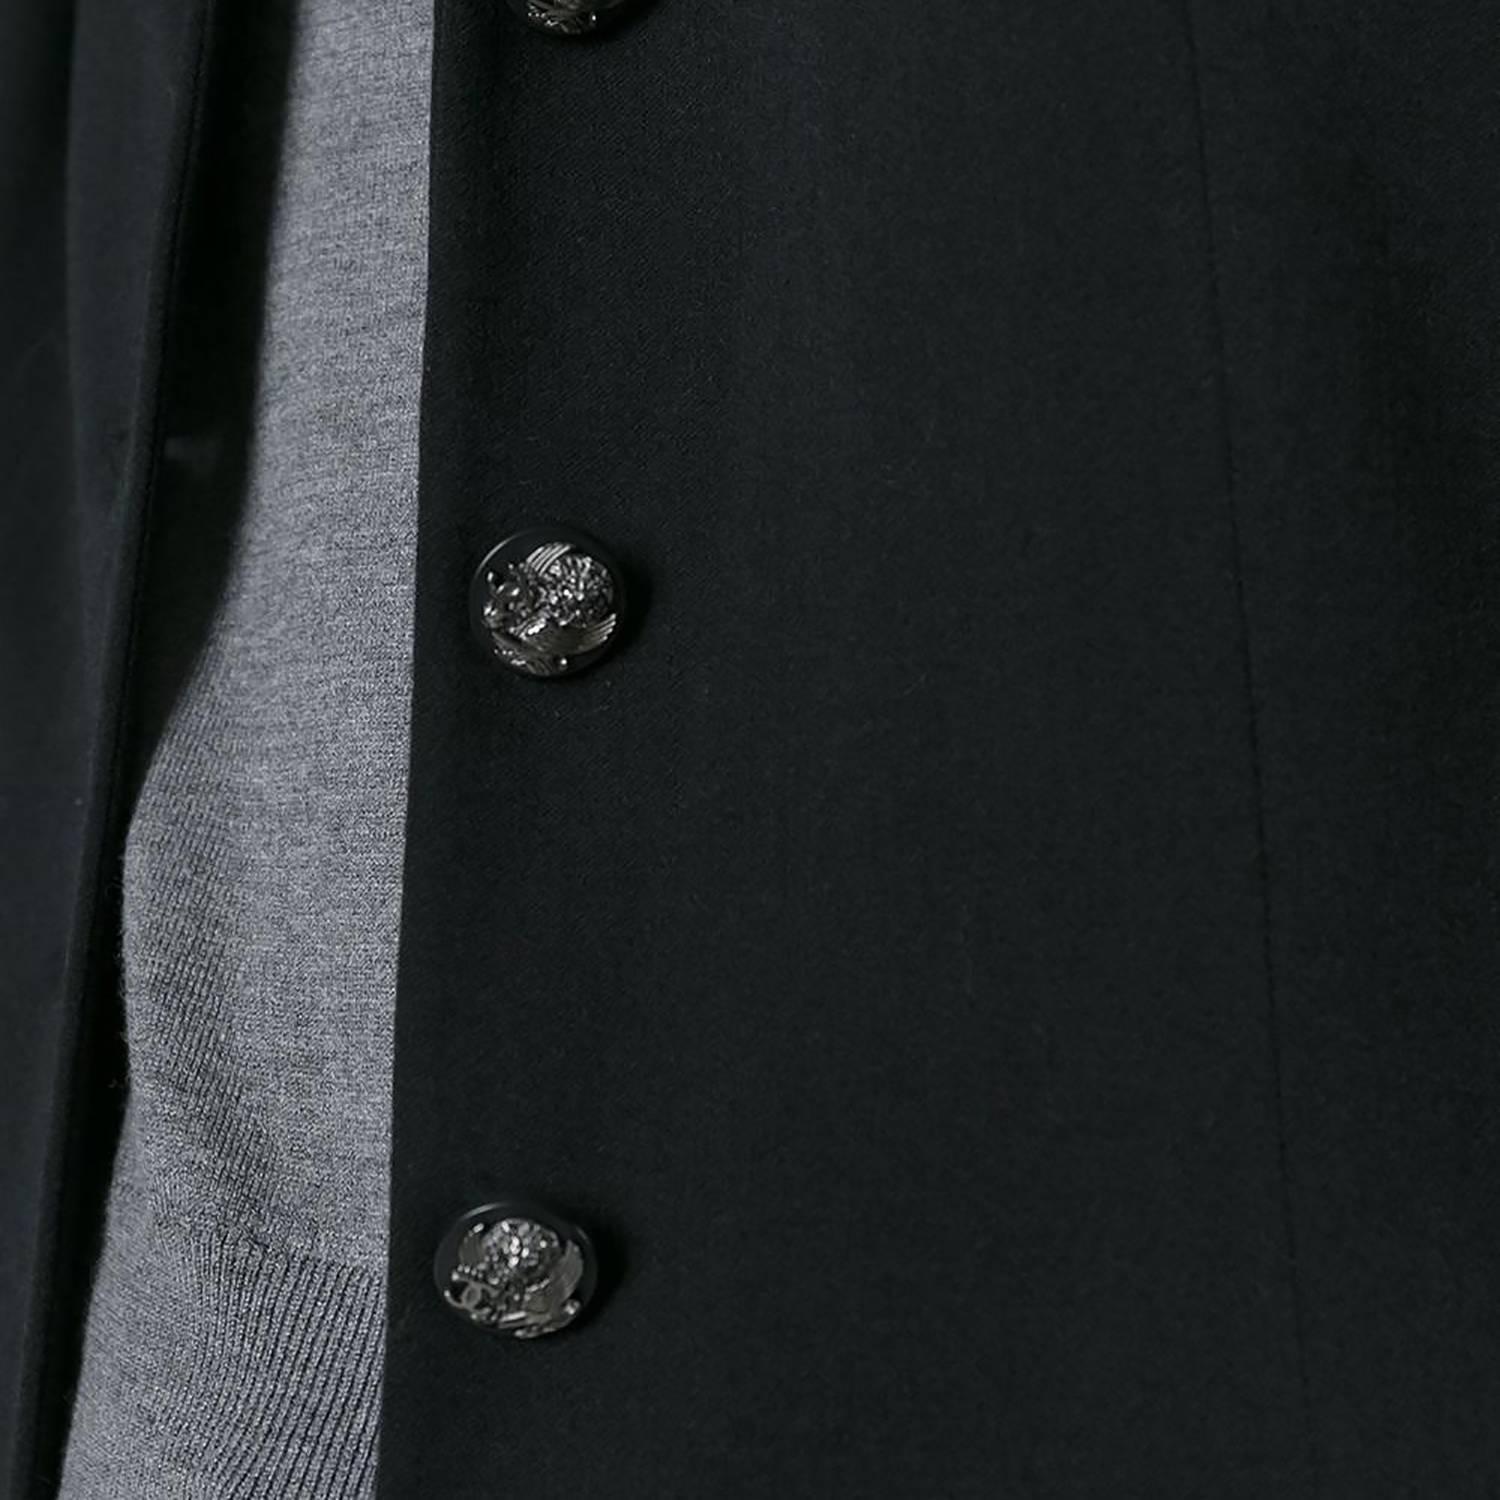 This vintage black Chanel jacket is a perfect instance of Chanel's deft tailoring, cut to a slightly cinched waist and a sharp shoulder profile. Accented with a silver-tone chain trimming the lining, and black and gunmetal buttons embossed with a